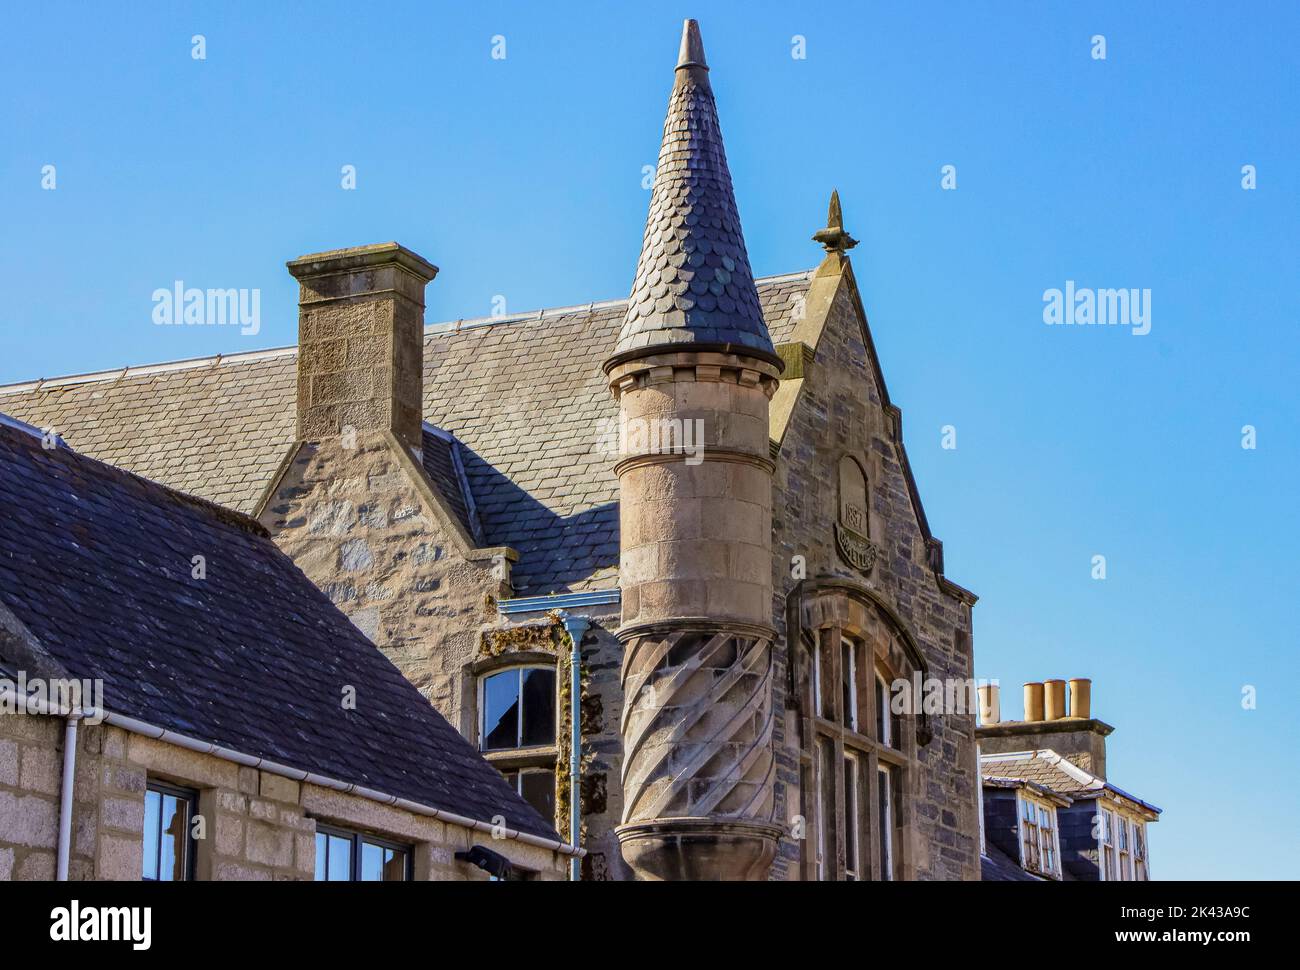 Stone building with a round tower and spiral made of stone Stock Photo